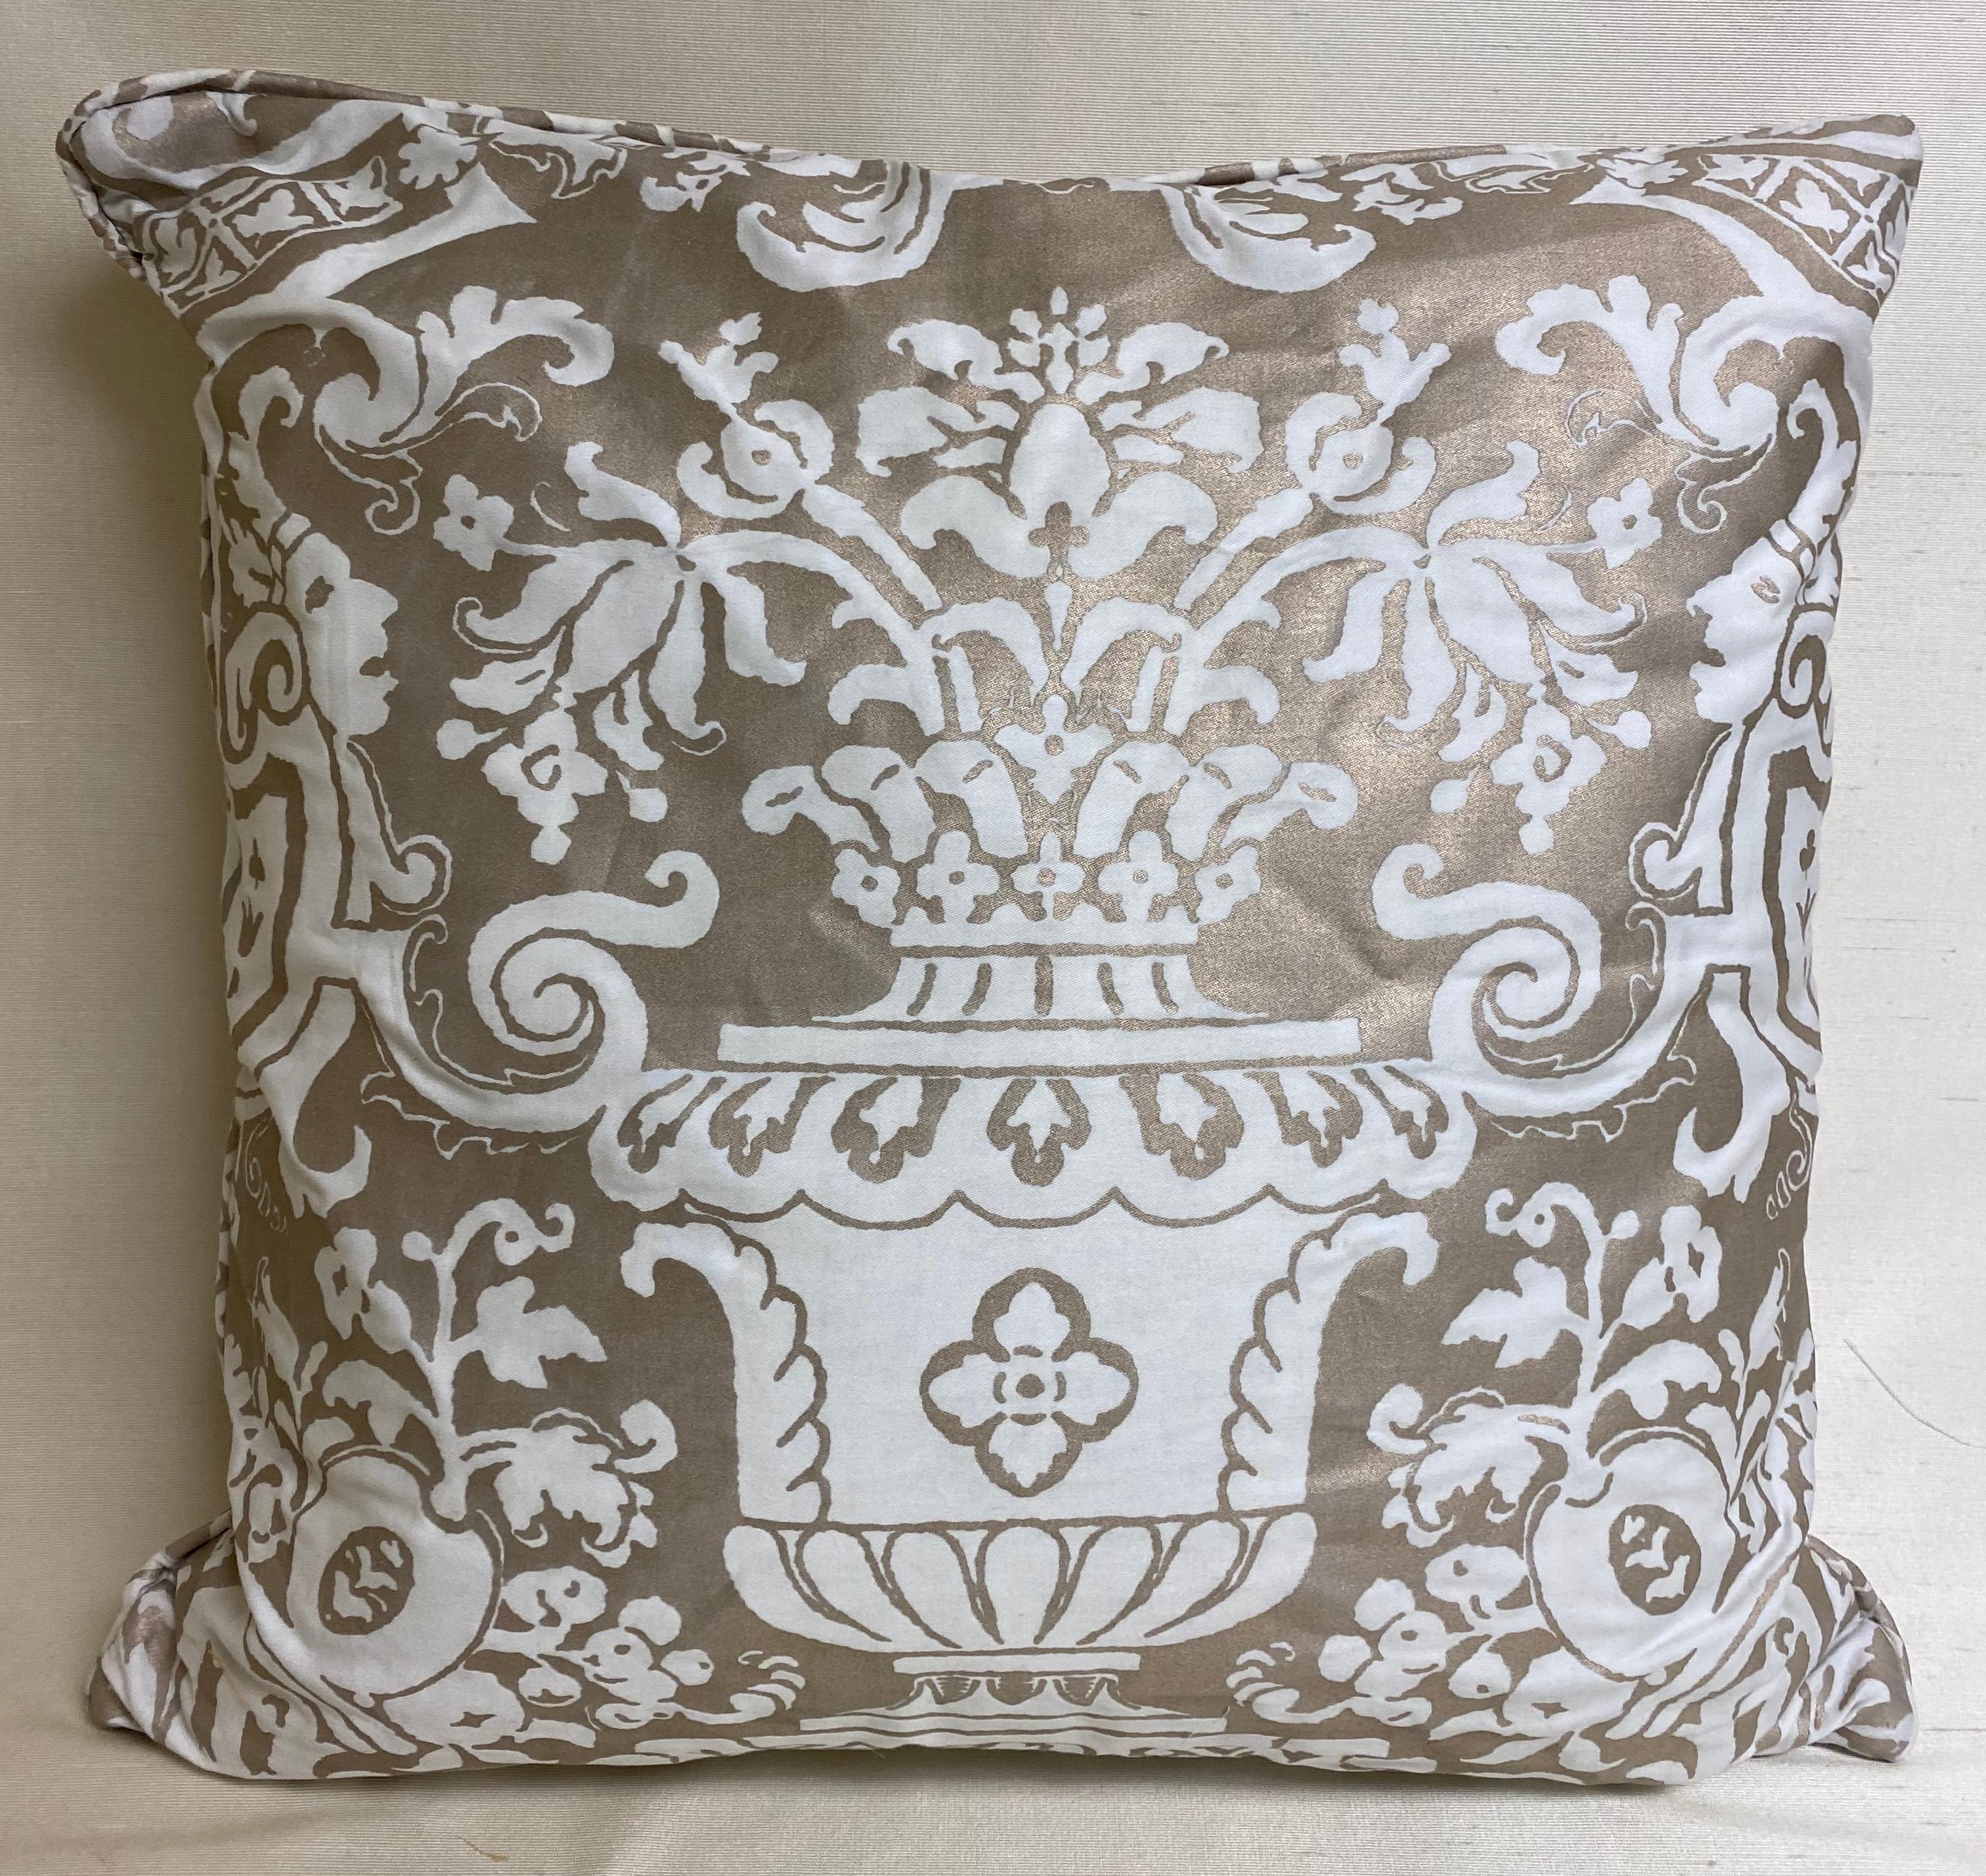 Decorative pair of down-filled silvery-taupe and white Fortuny cushions with Fortuny border.
